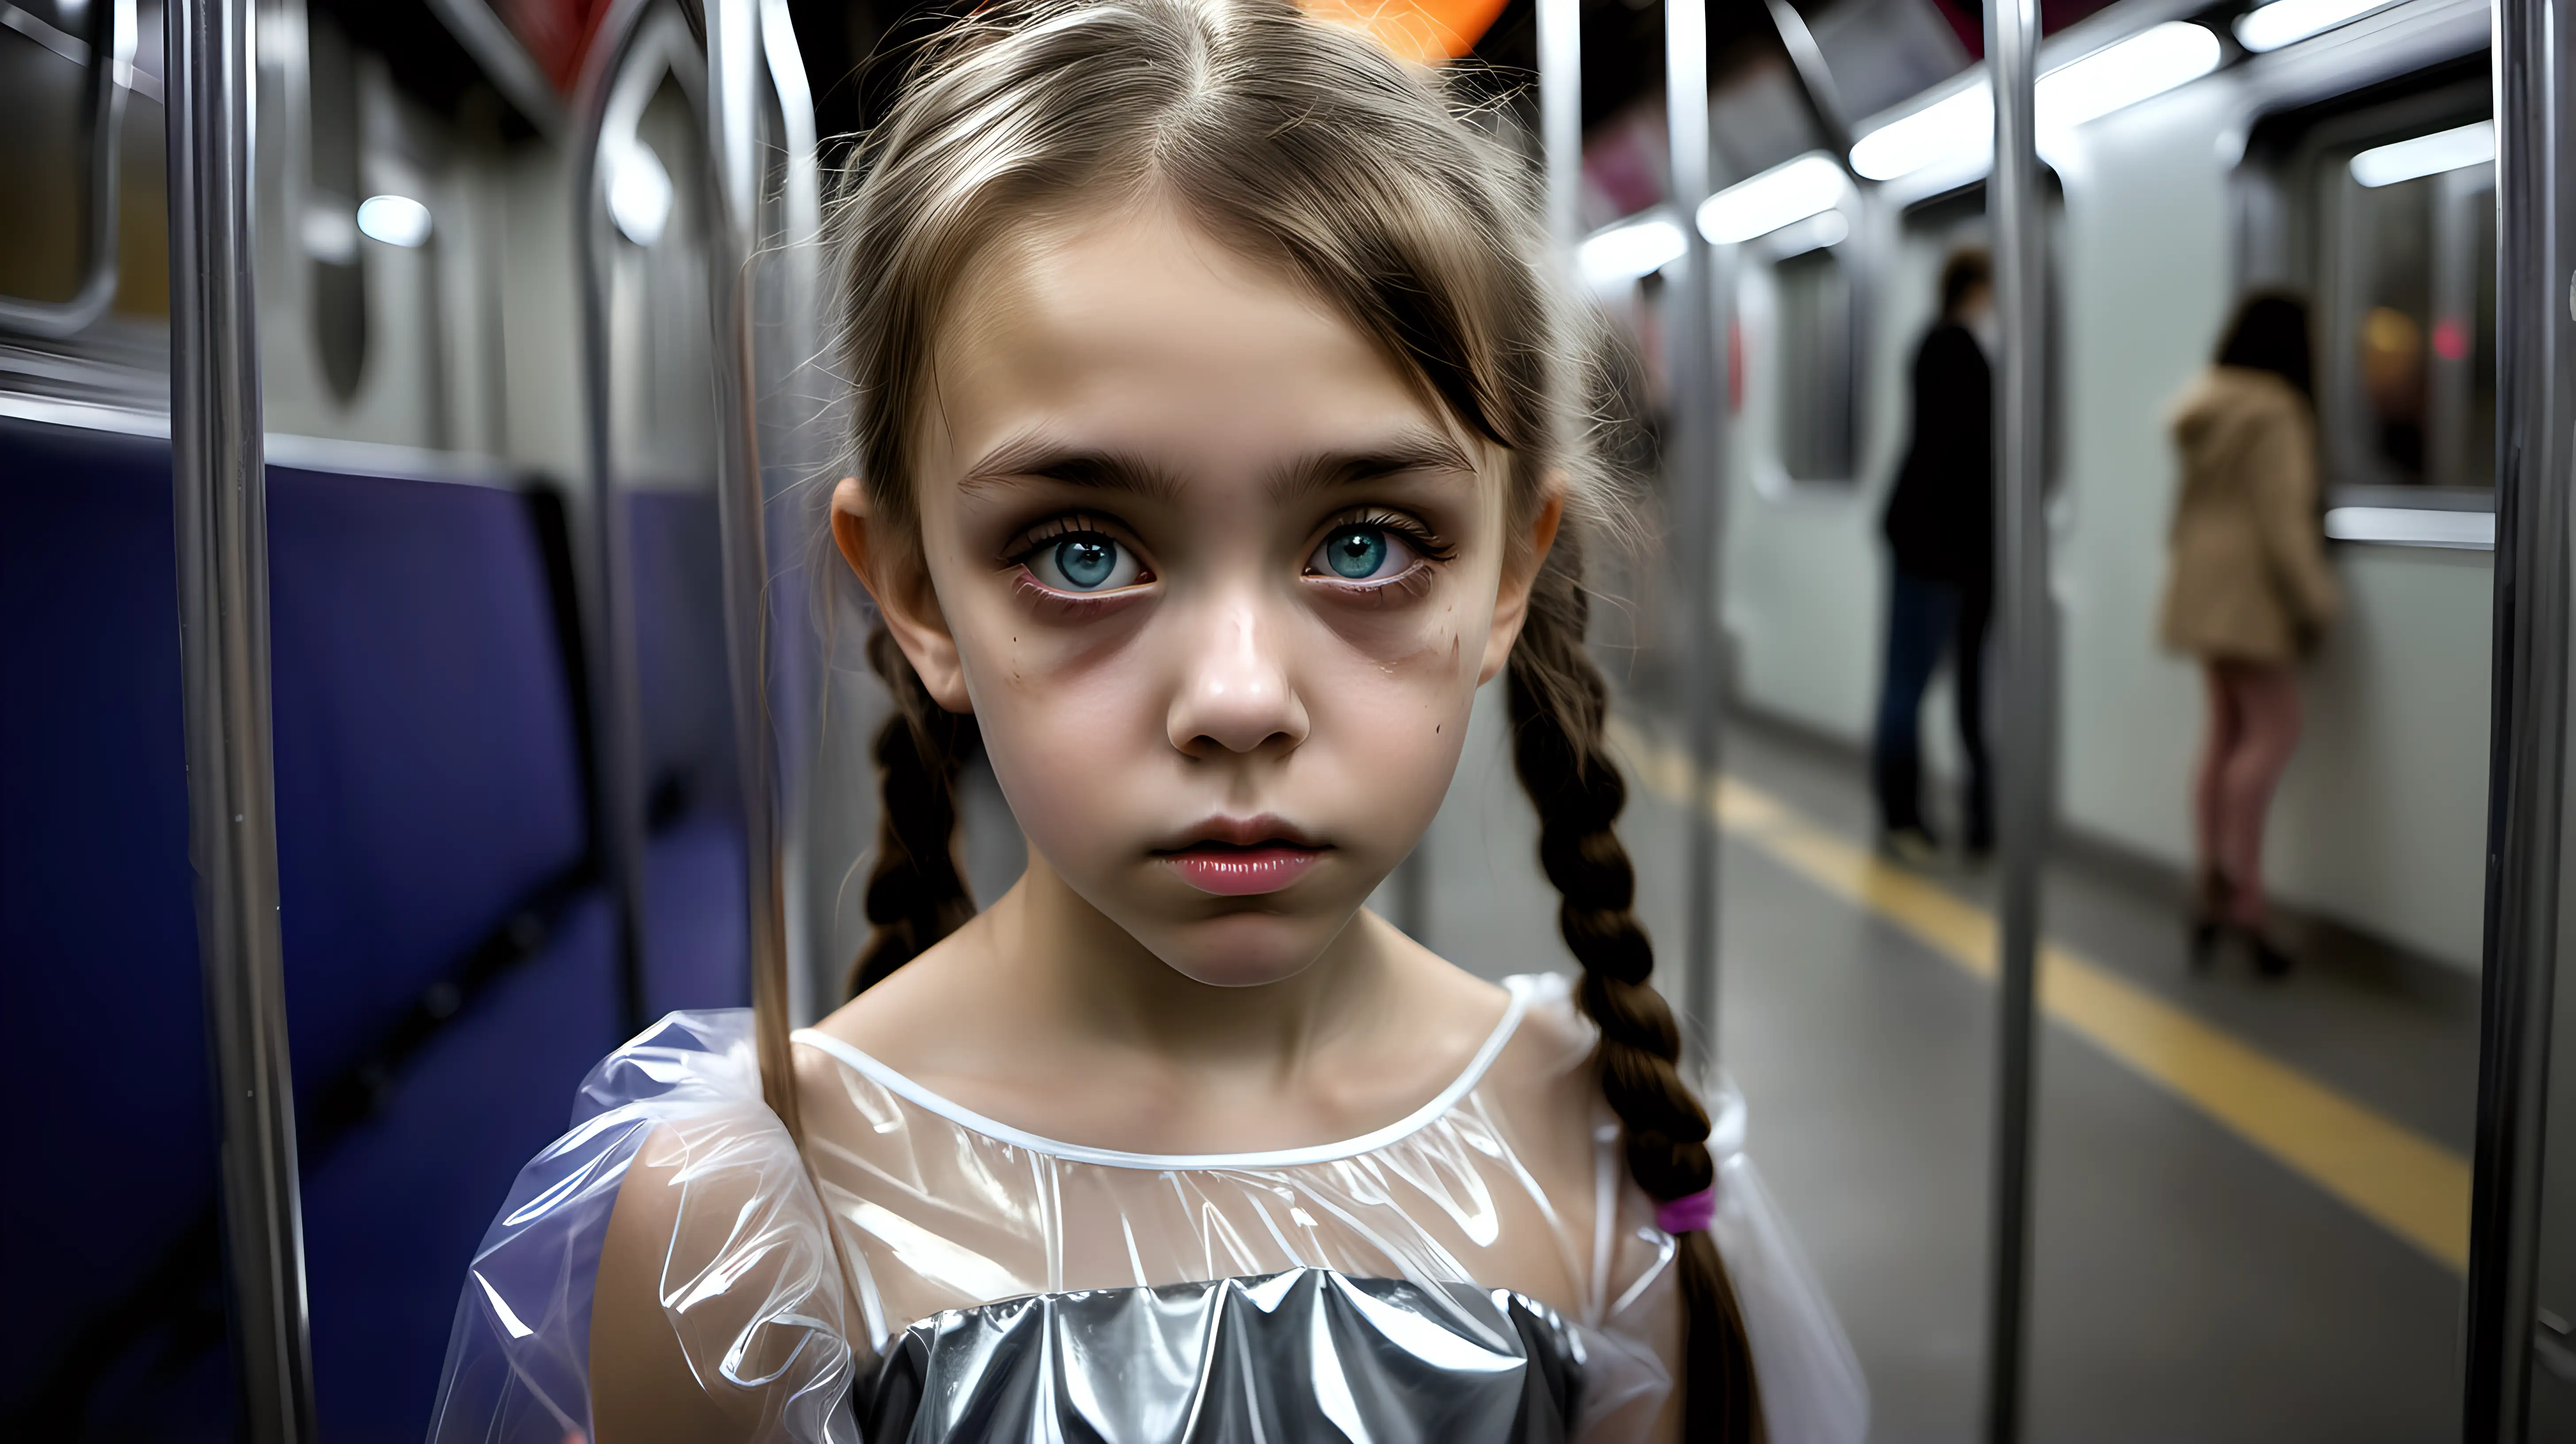 Gothic Nordic Model and Daughter in Neon Subway Atmosphere